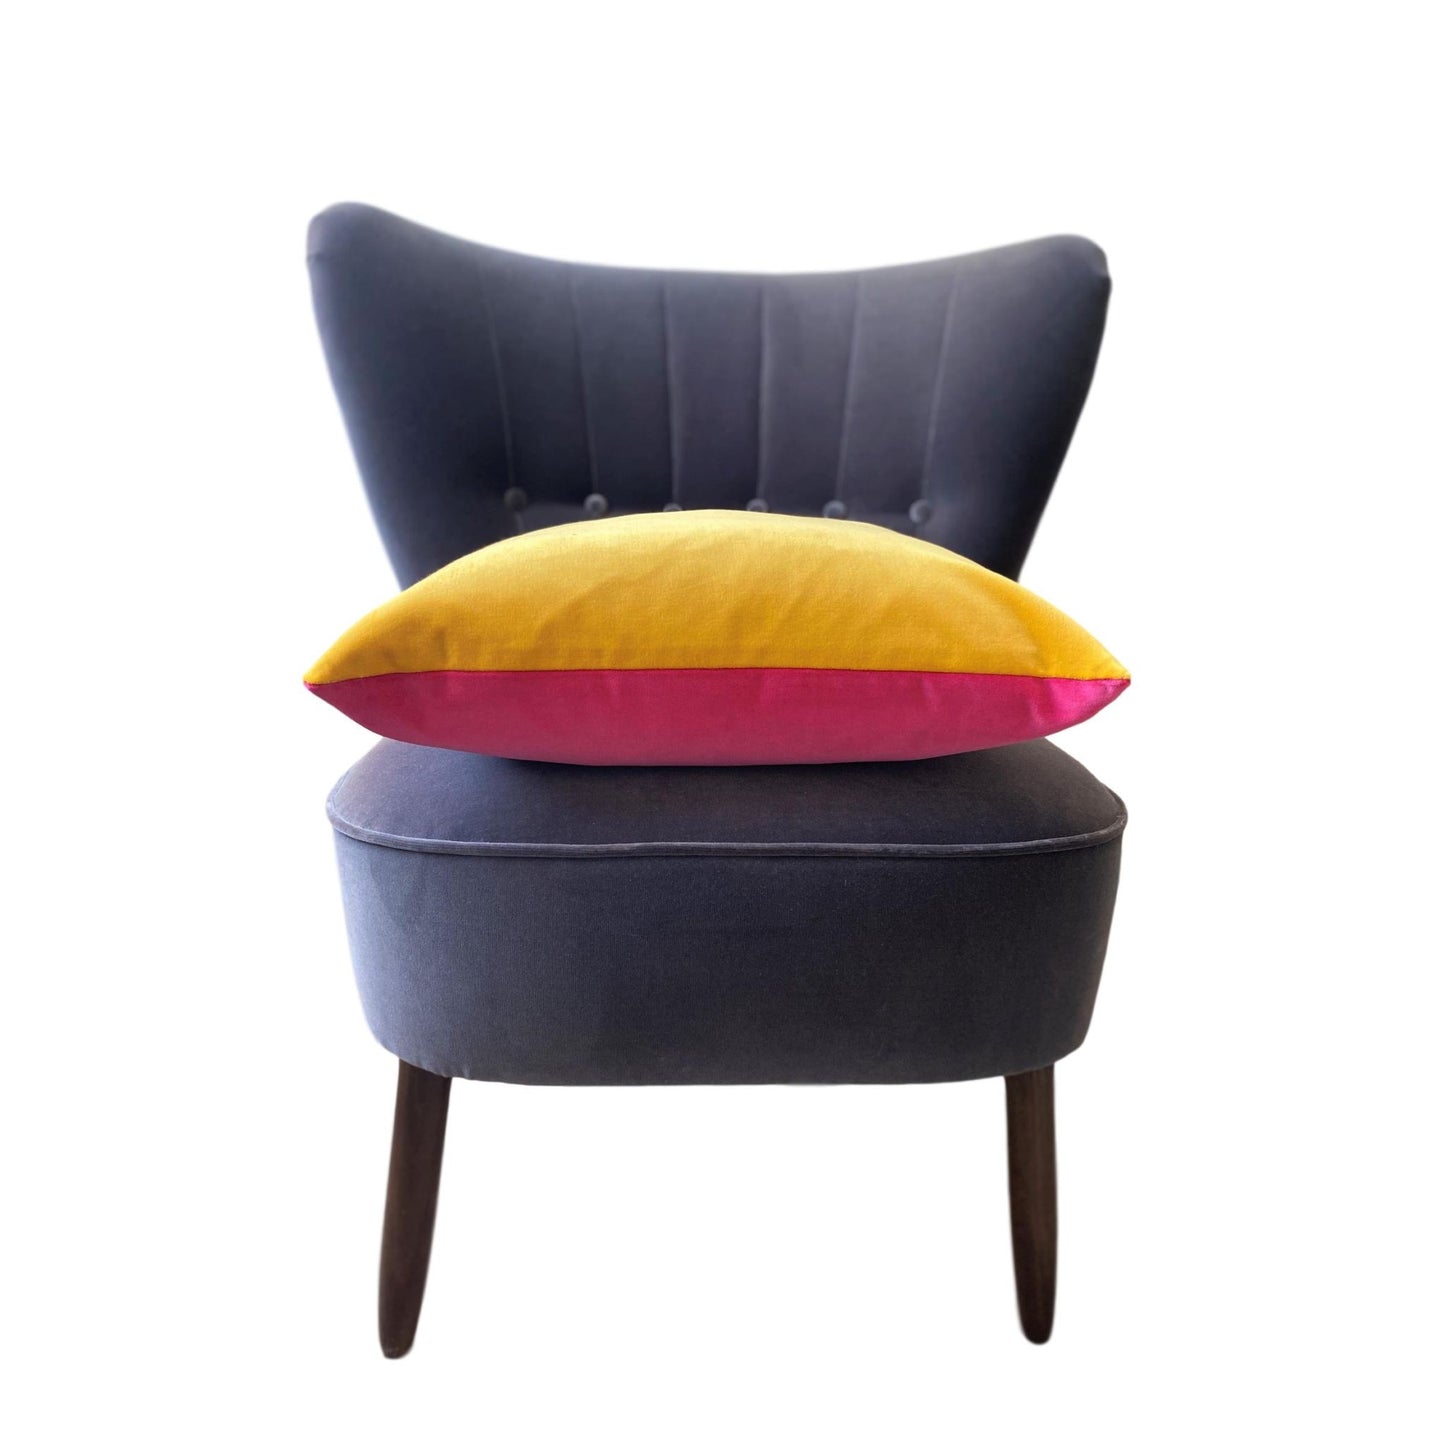 bright yellow cushion luxe 39